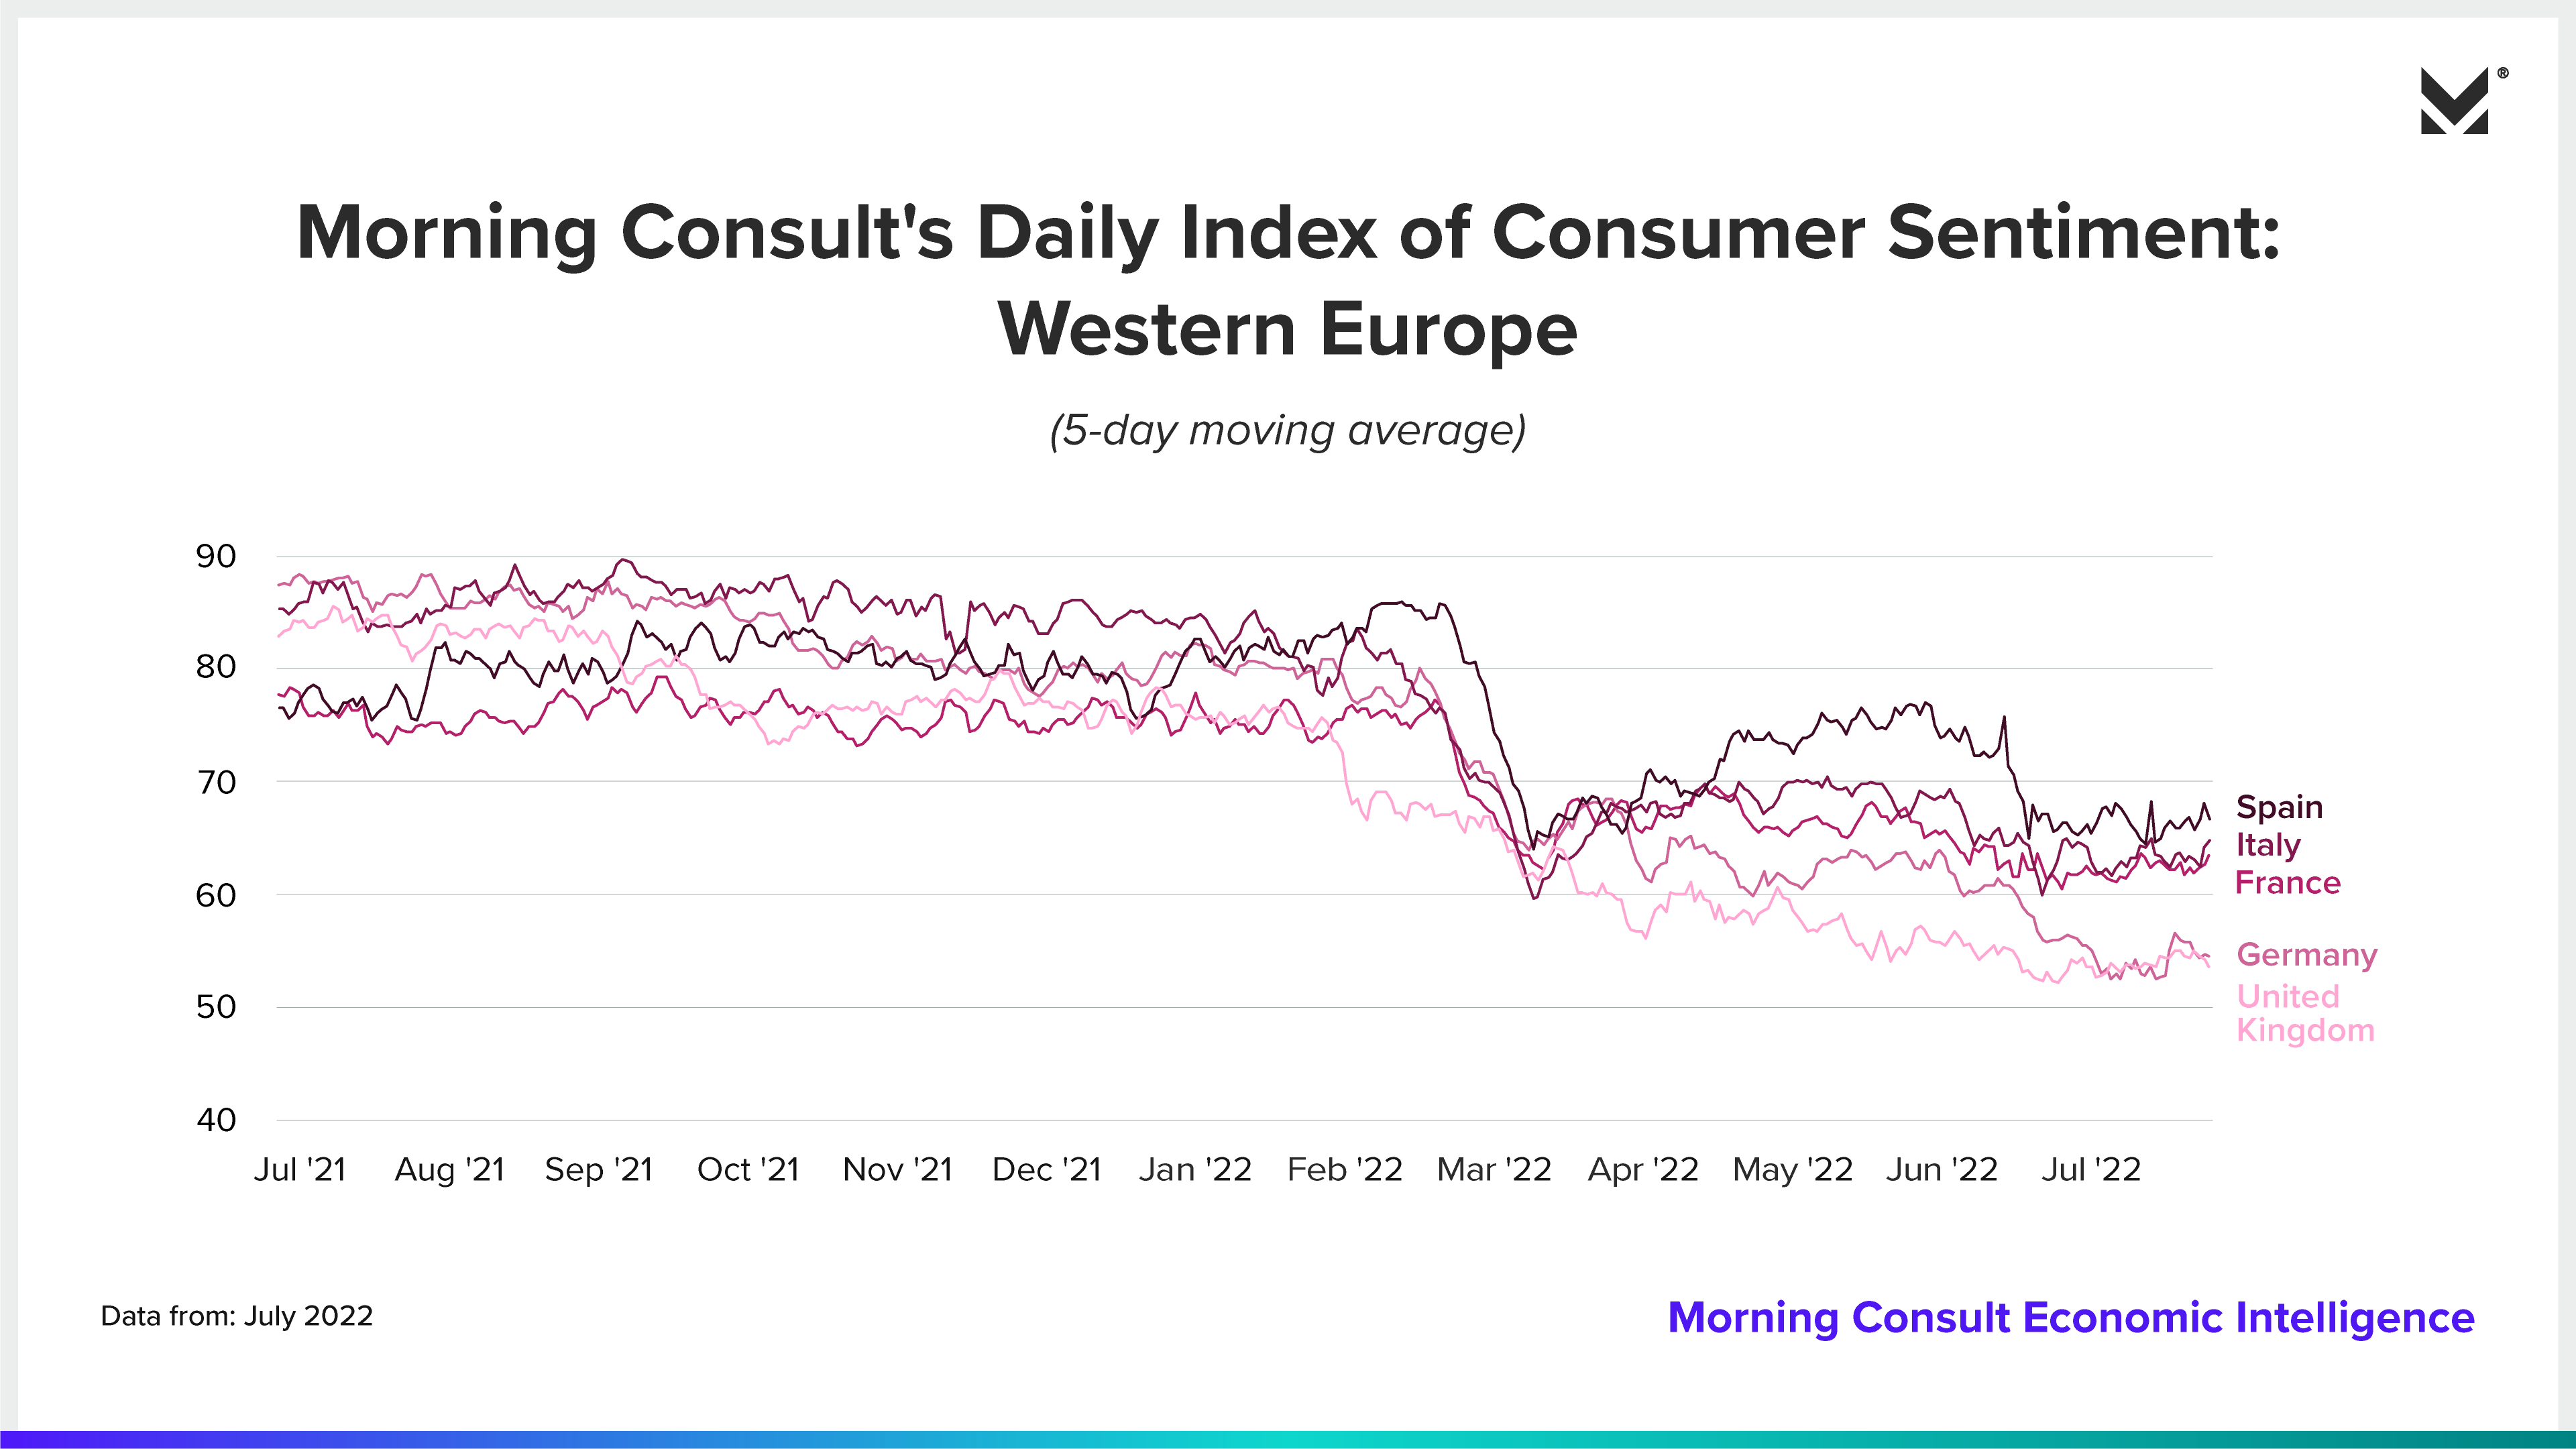 Line chart of consumer confidence data from Western Europe showing a fall in consumer sentiment in July.